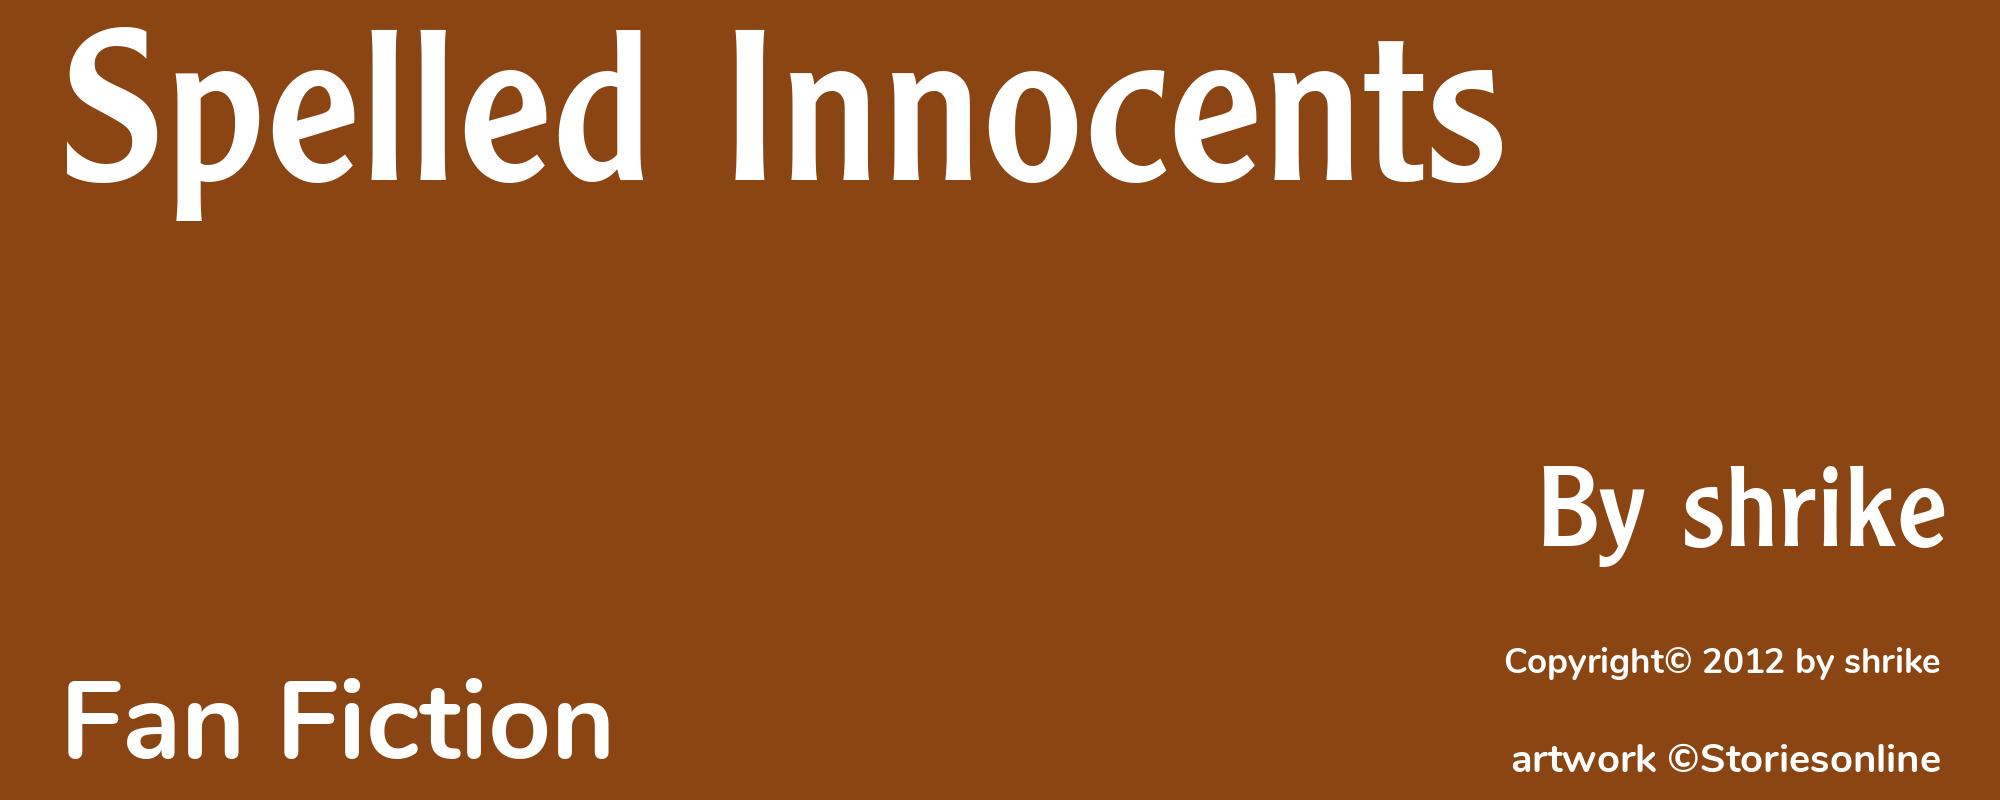 Spelled Innocents - Cover